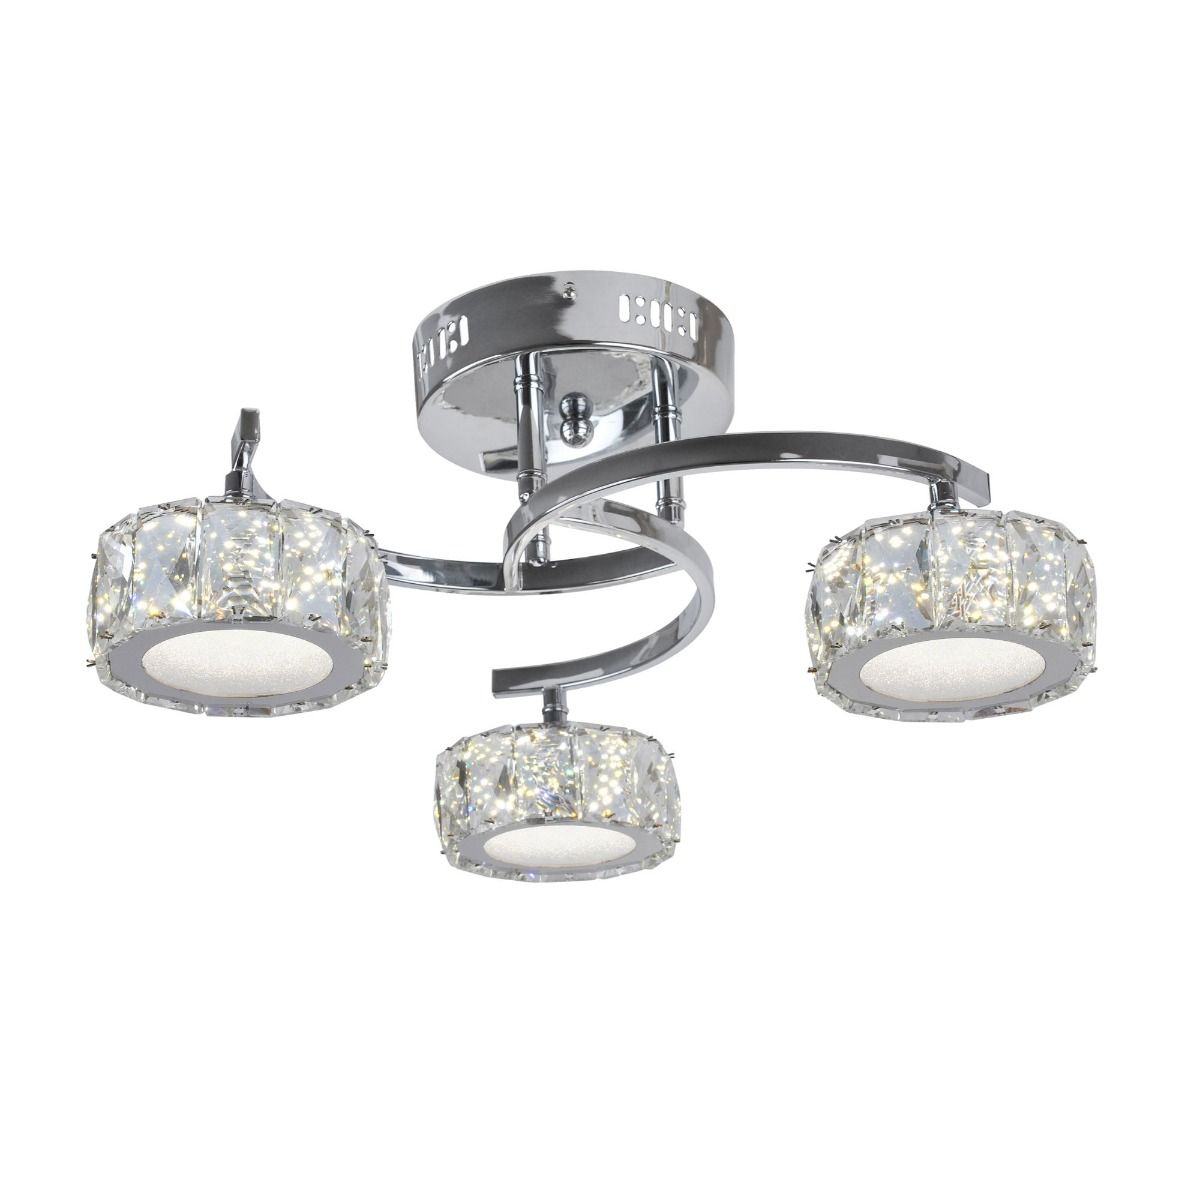 Dilan 3 Light LED Cool White Semi-Flush Fitting Satin Nickel Ceiling Light with Clear Jewels